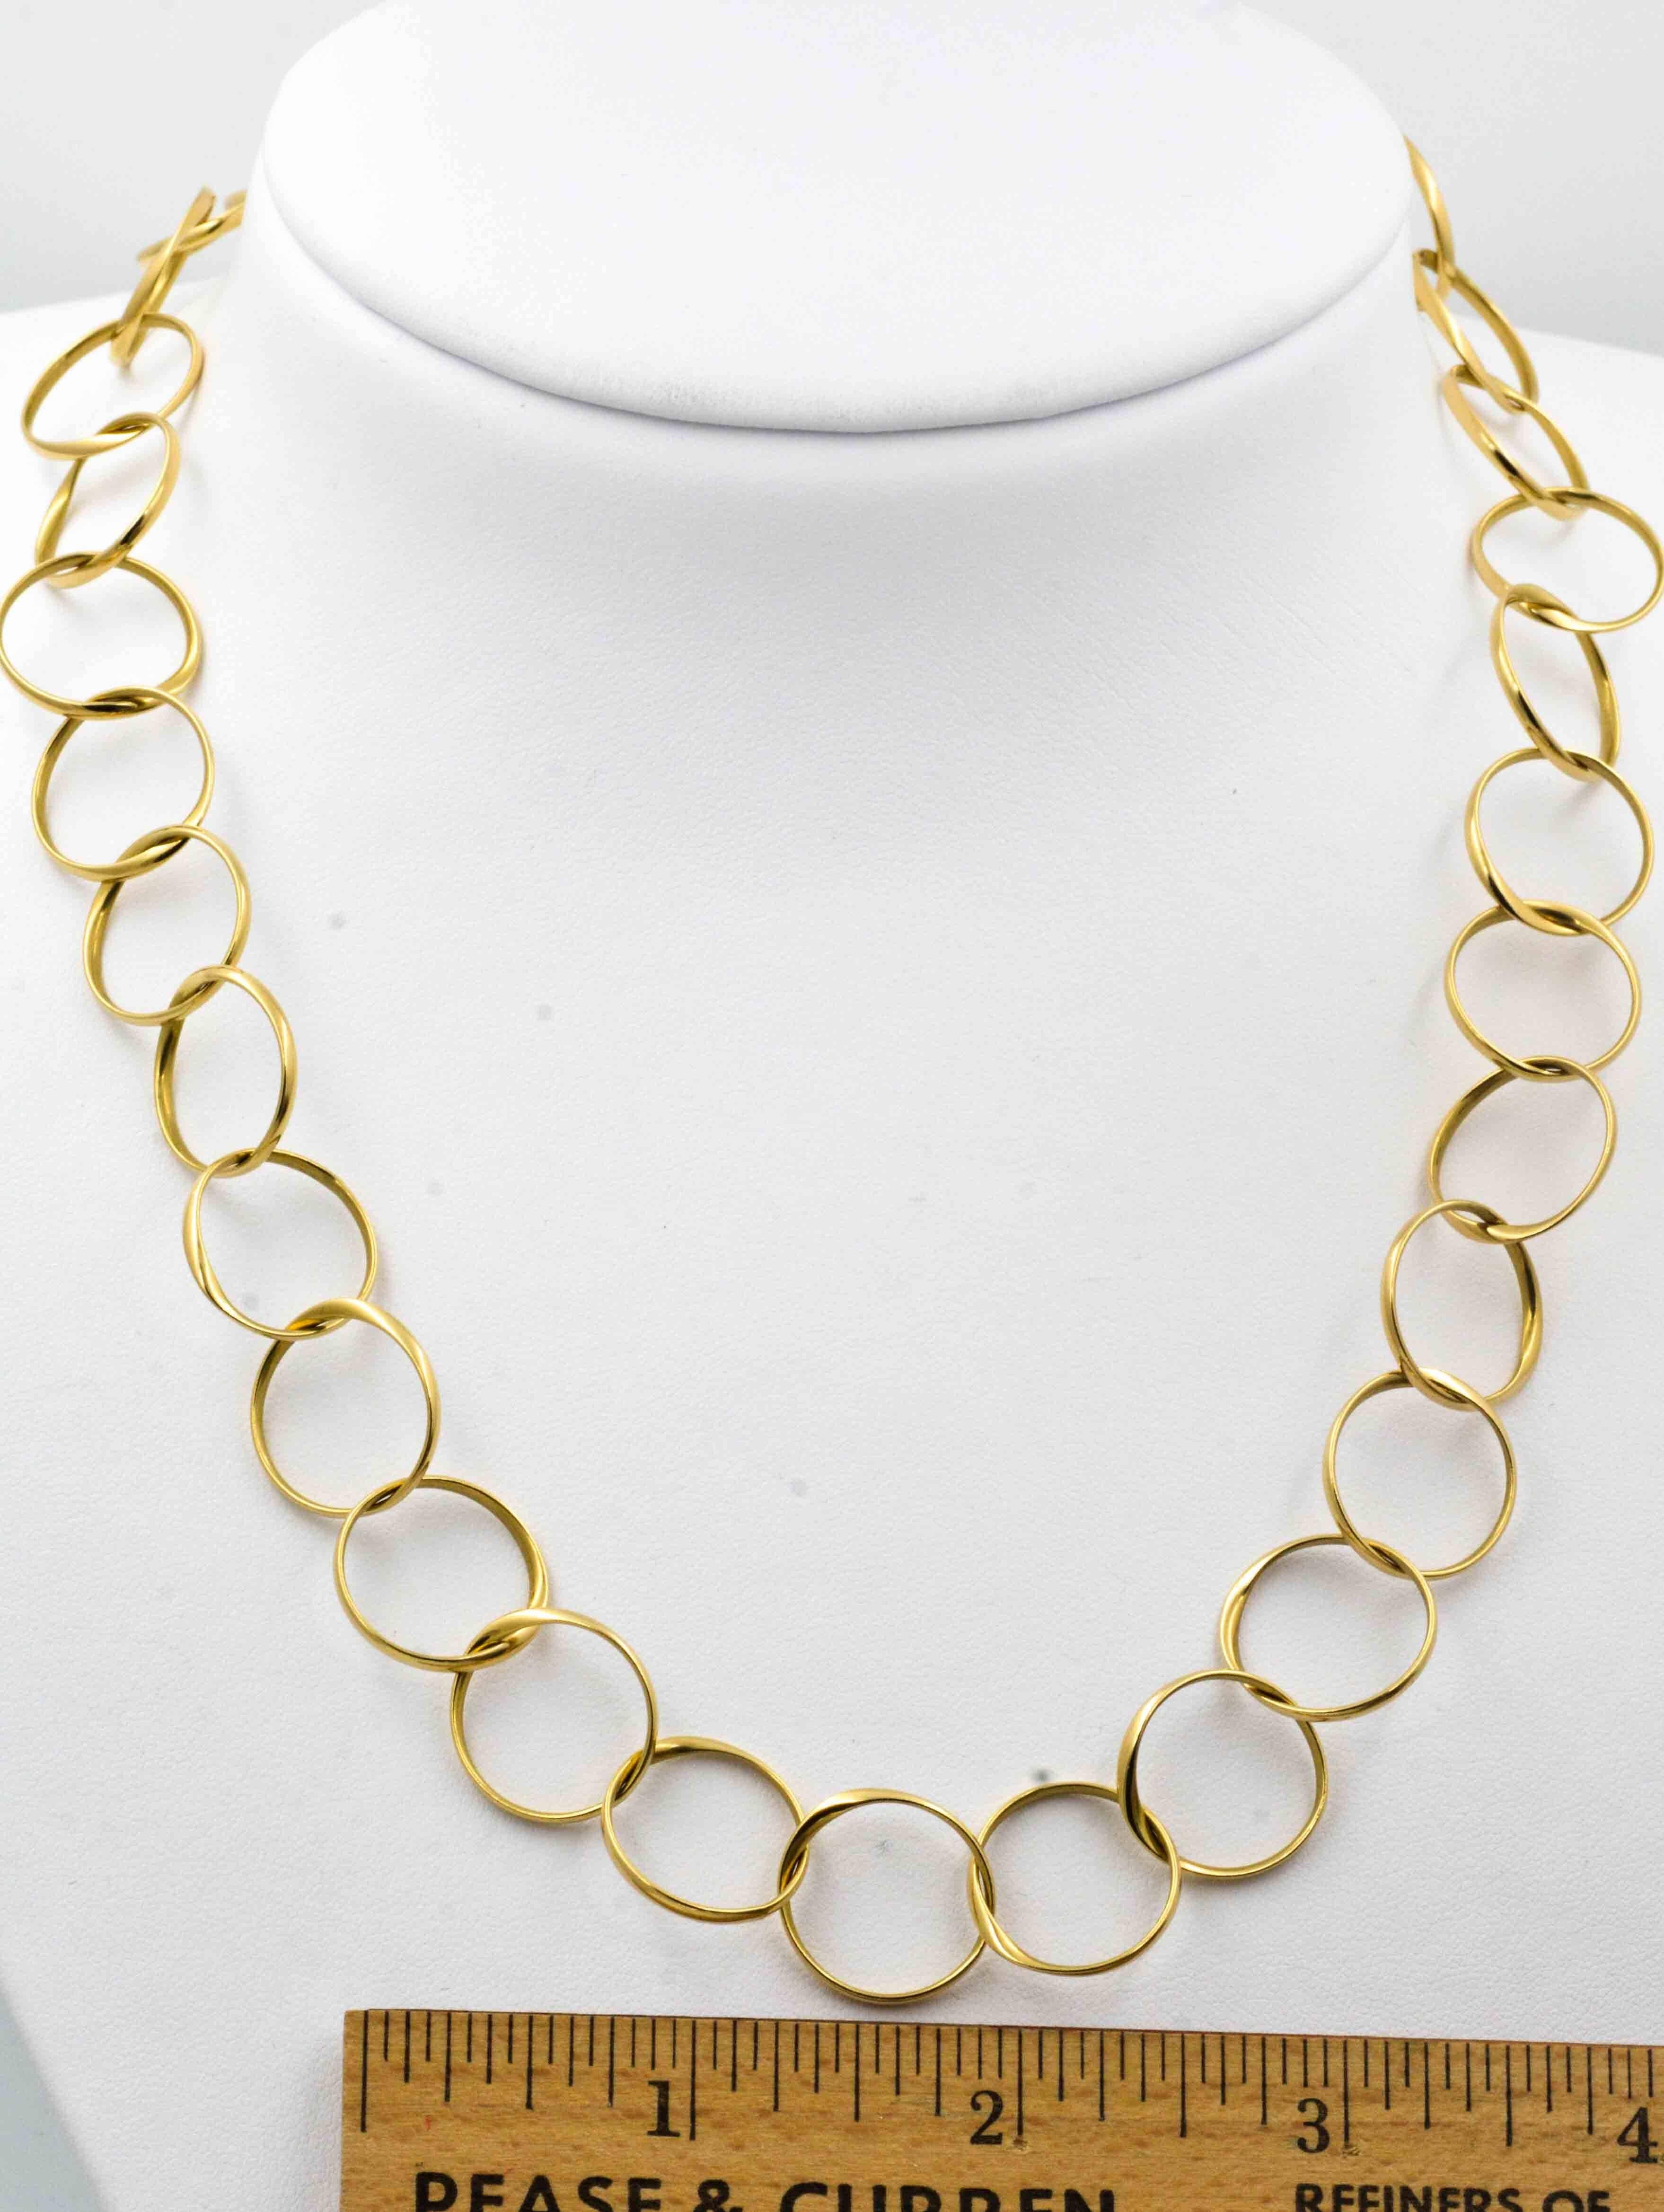 Whimsical and light, this circle link chain will add finesse to any outfit. Made in 18 Kt yellow gold, this chain measures 20 inches in length. 